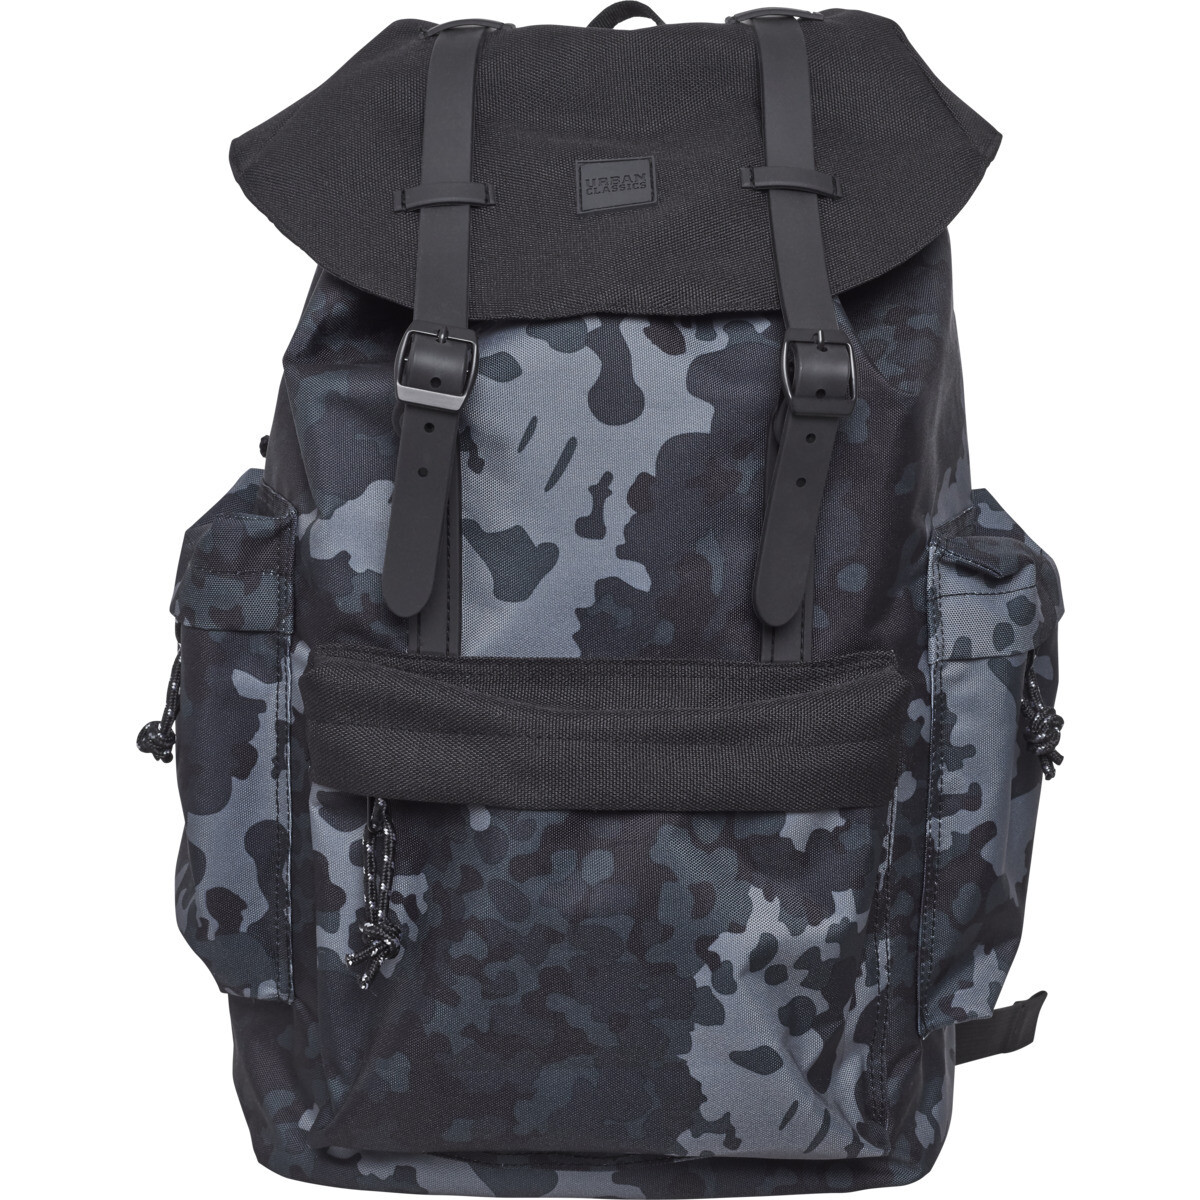 Backpack With Multibags - Dark Camo